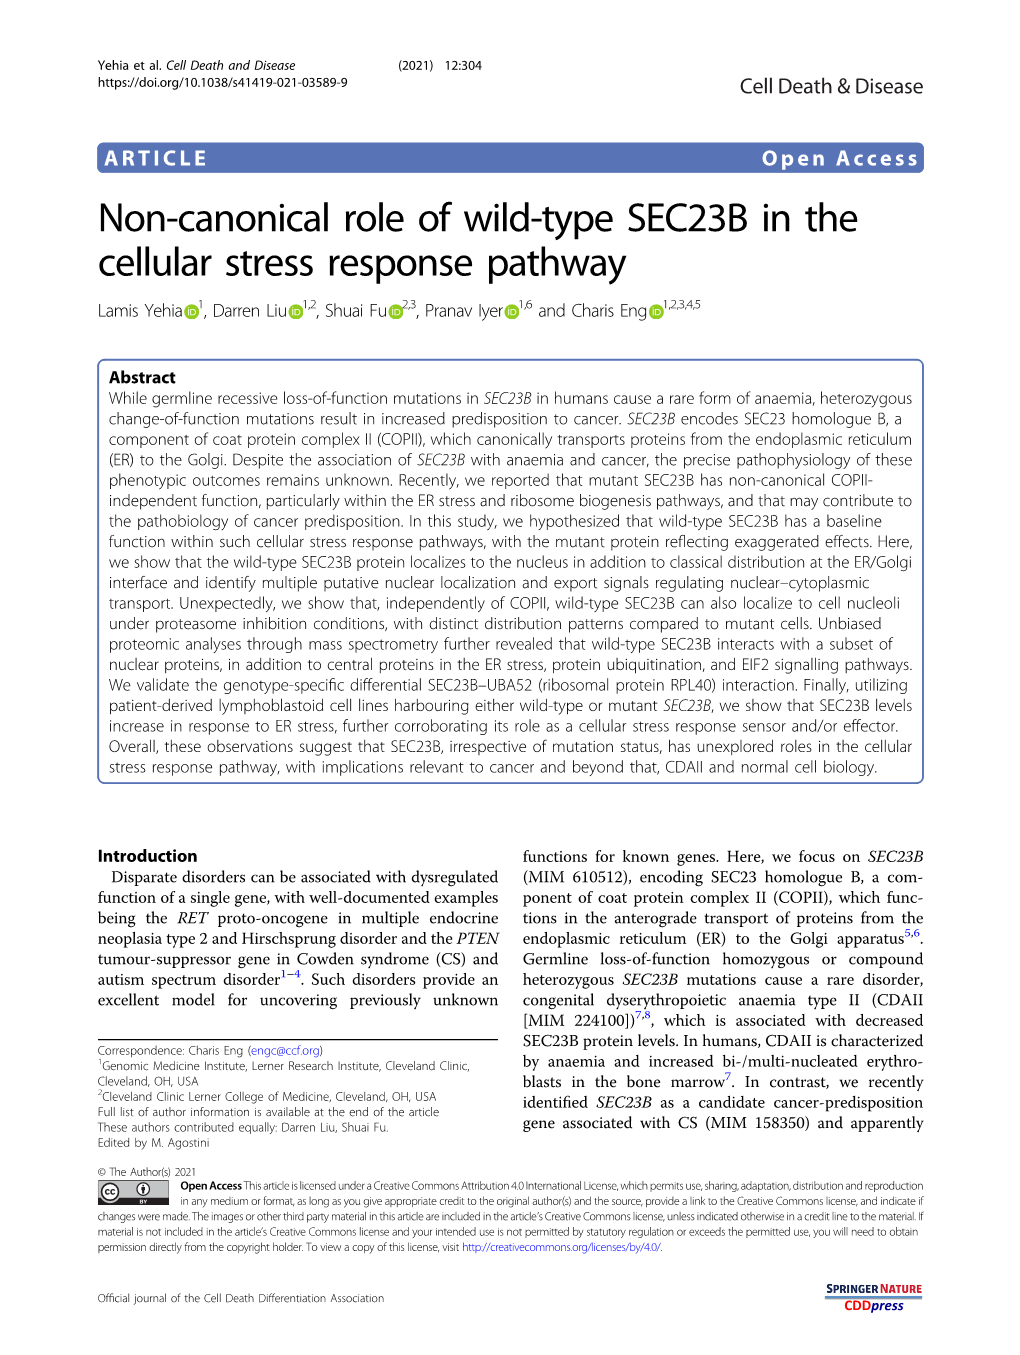 Non-Canonical Role of Wild-Type SEC23B in the Cellular Stress Response Pathway Lamis Yehia 1, Darren Liu 1,2,Shuaifu 2,3,Pranaviyer 1,6 and Charis Eng 1,2,3,4,5